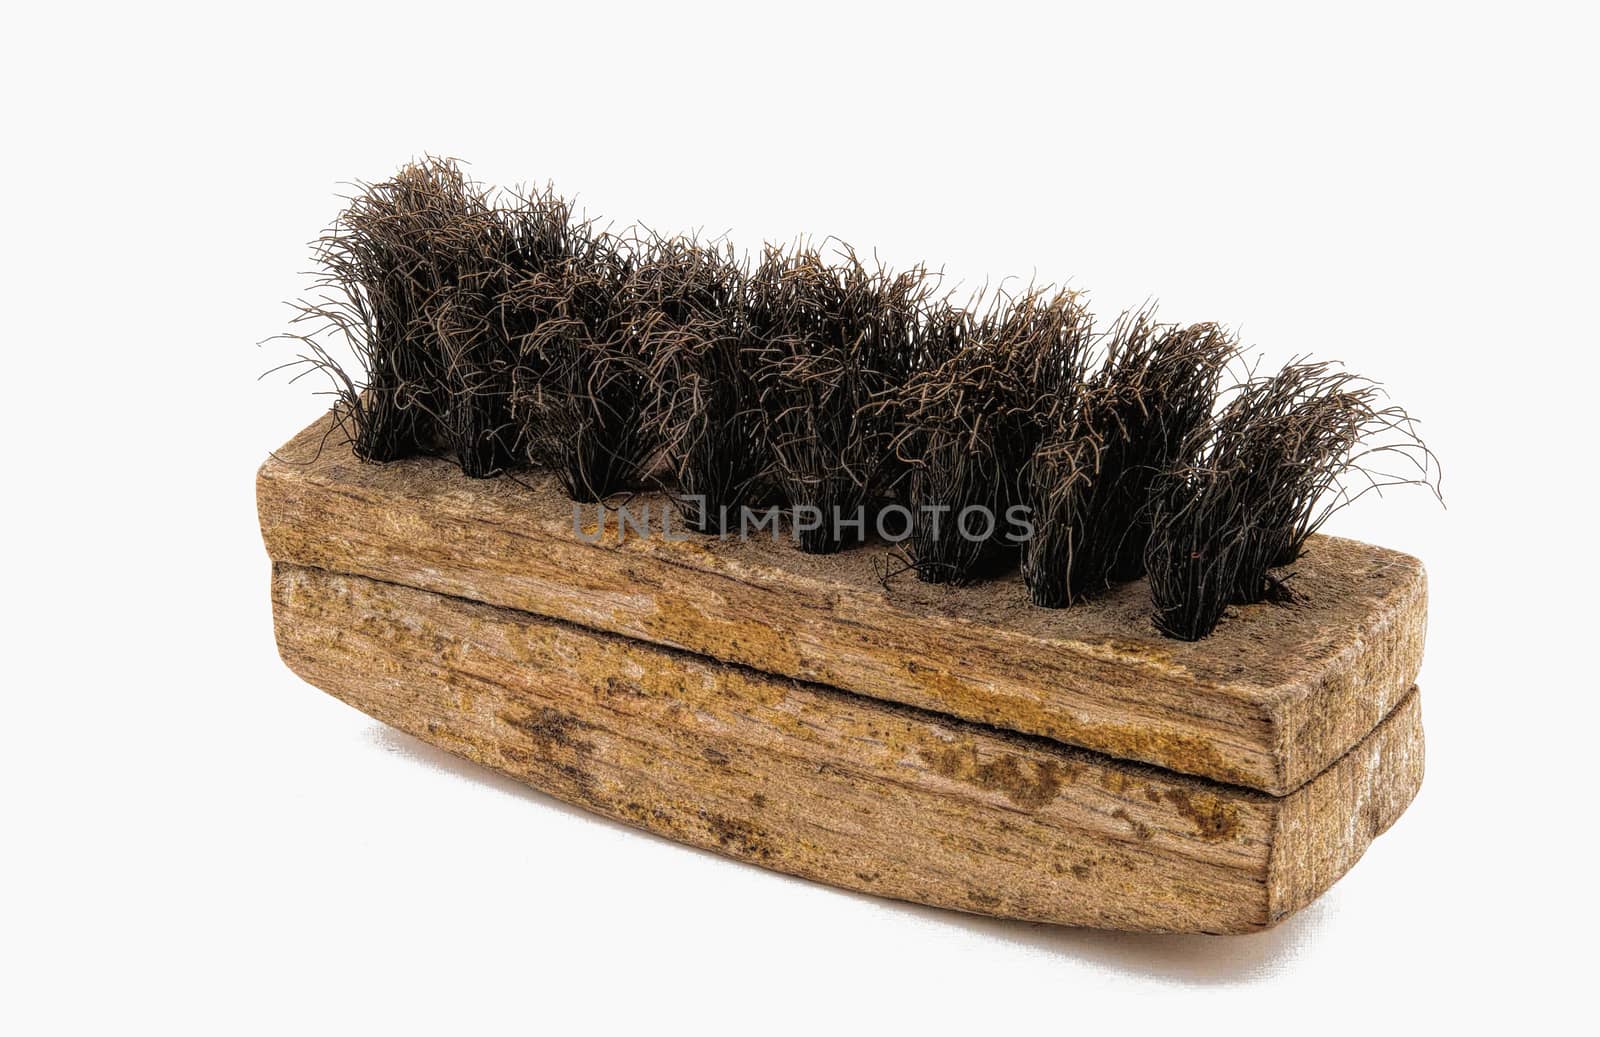 Bronze brush with a wooden handle, for cleaning suede photographed against a white background